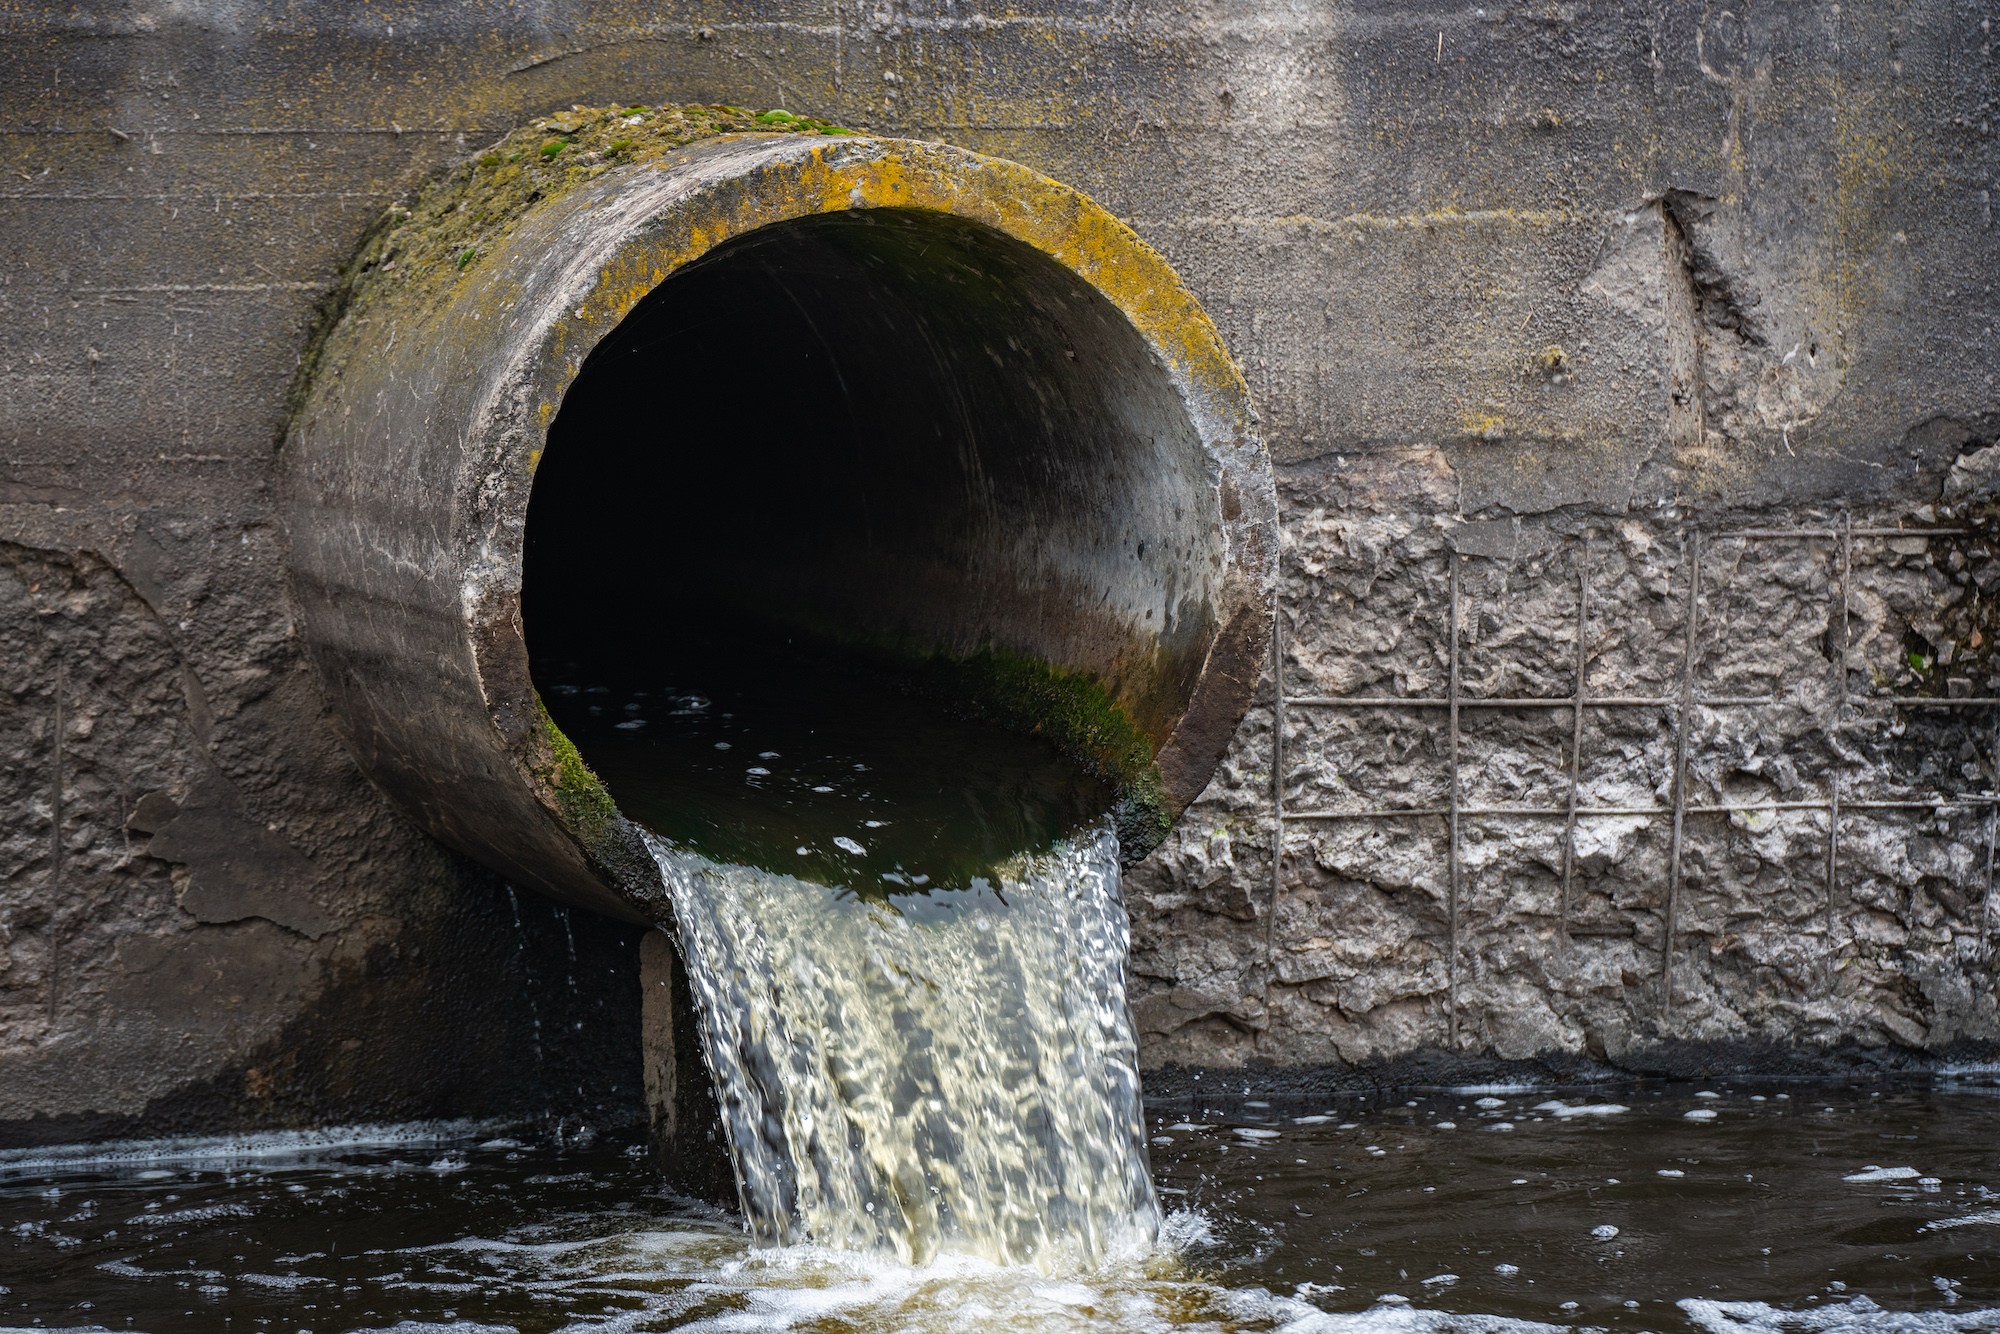 wastewater flows out of pipe